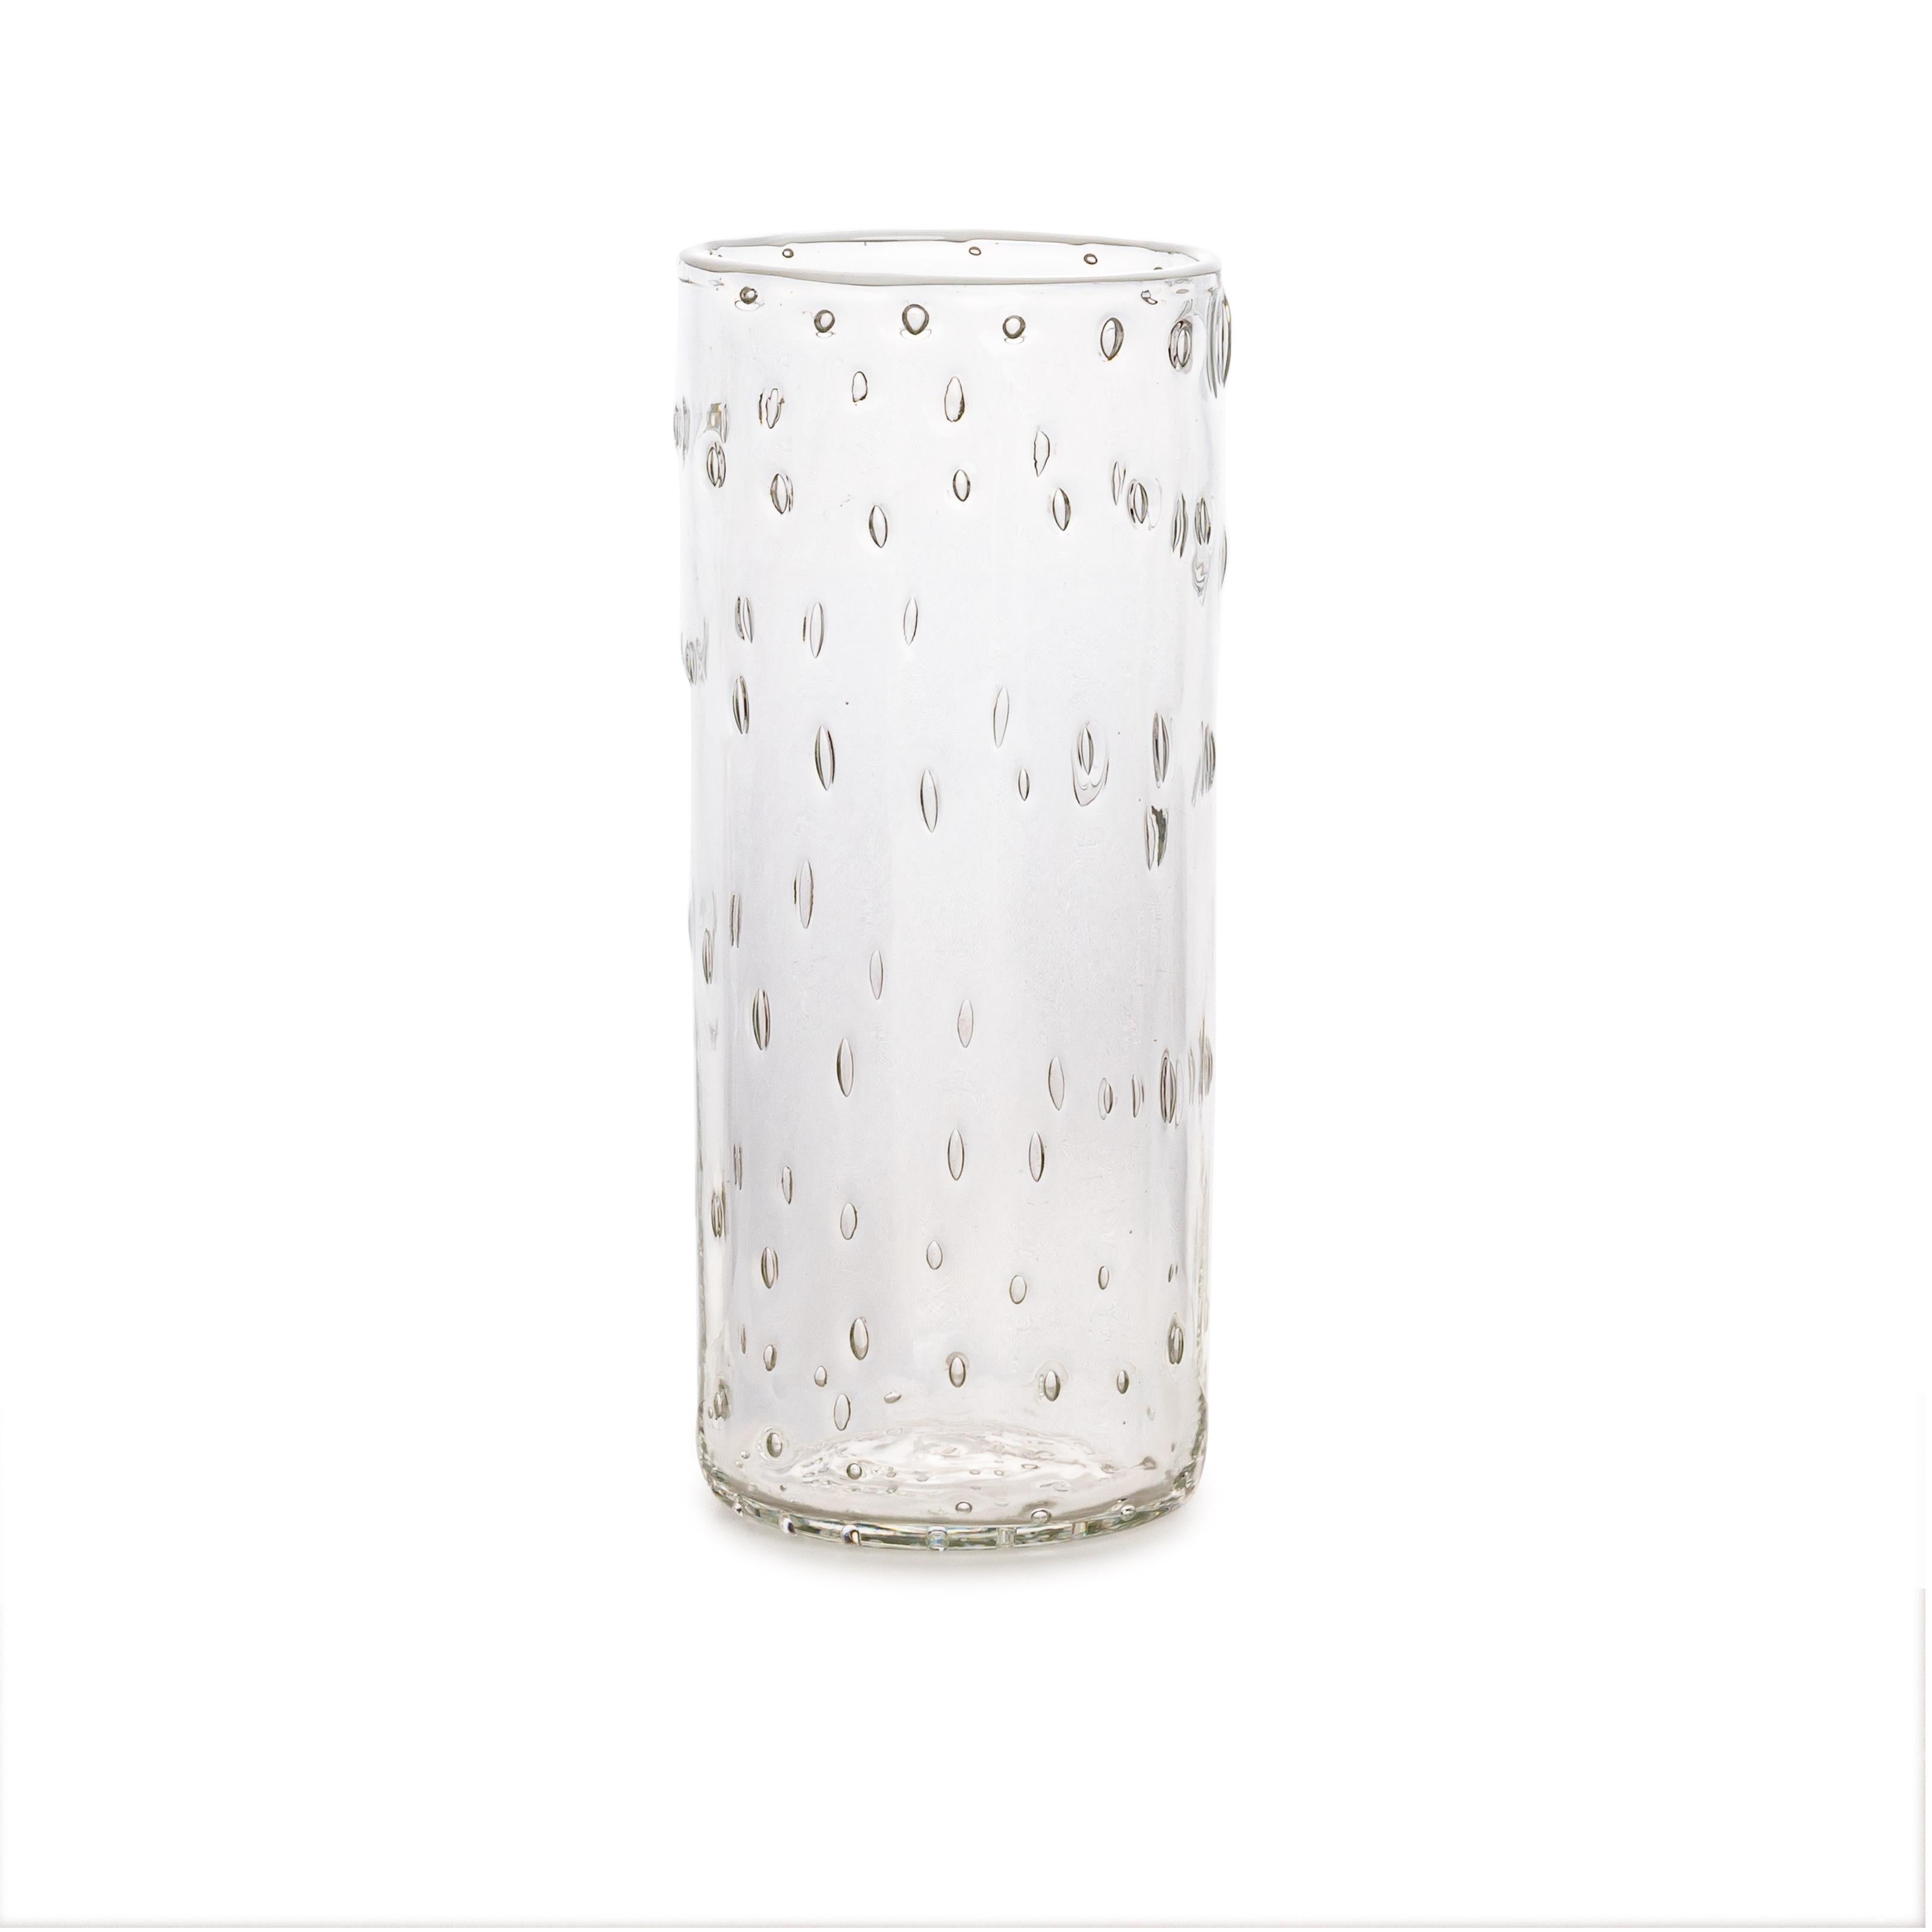 Discover our Ultralight Murano glass tumblers, meticulously crafted by an expert Maestro who specialize in the art of mouth blowing. These tumblers are skillfully created without the use of molds, ensuring their unique and handcrafted quality.